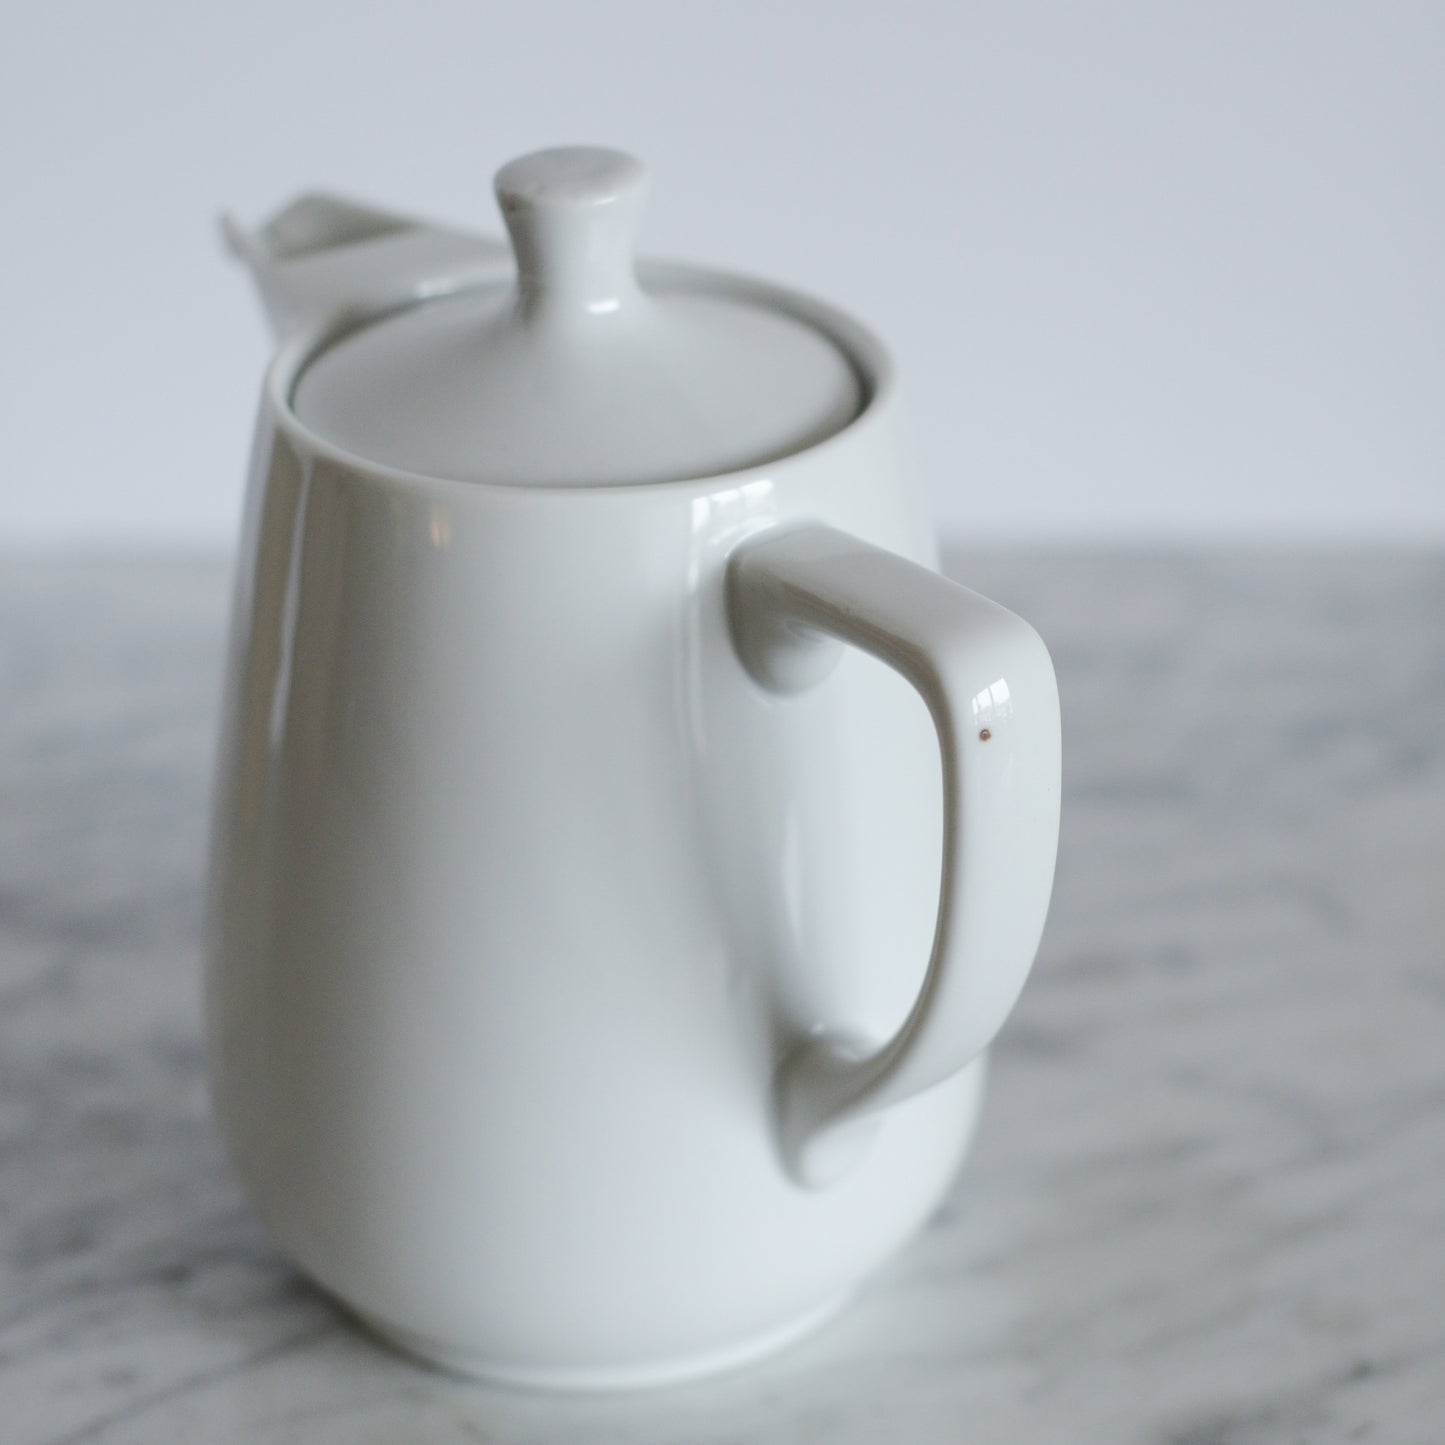 White Porcelain Coffee Carafe by Melitta